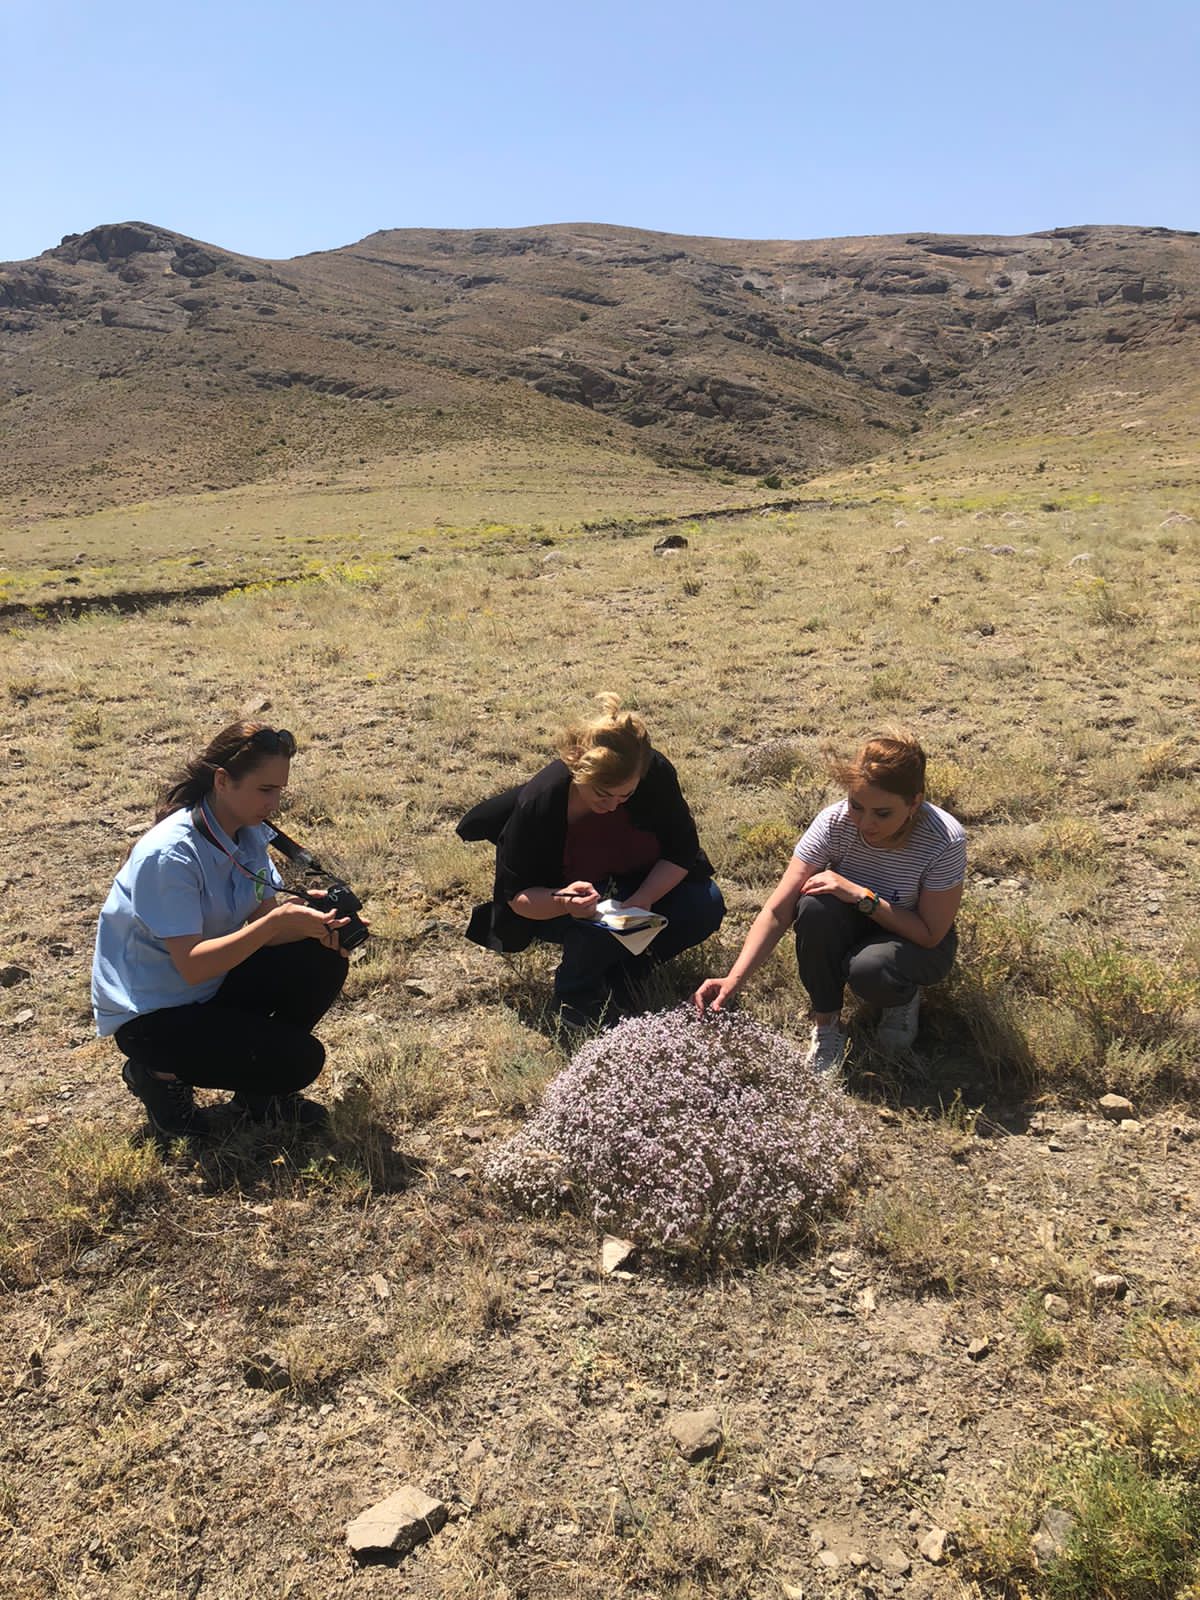 A group of 3 people crouching down around a plant specimen, one with a camera, one taking notes and one touching the plant. With mountainous hills and a barren, grassy landscape in the backgound